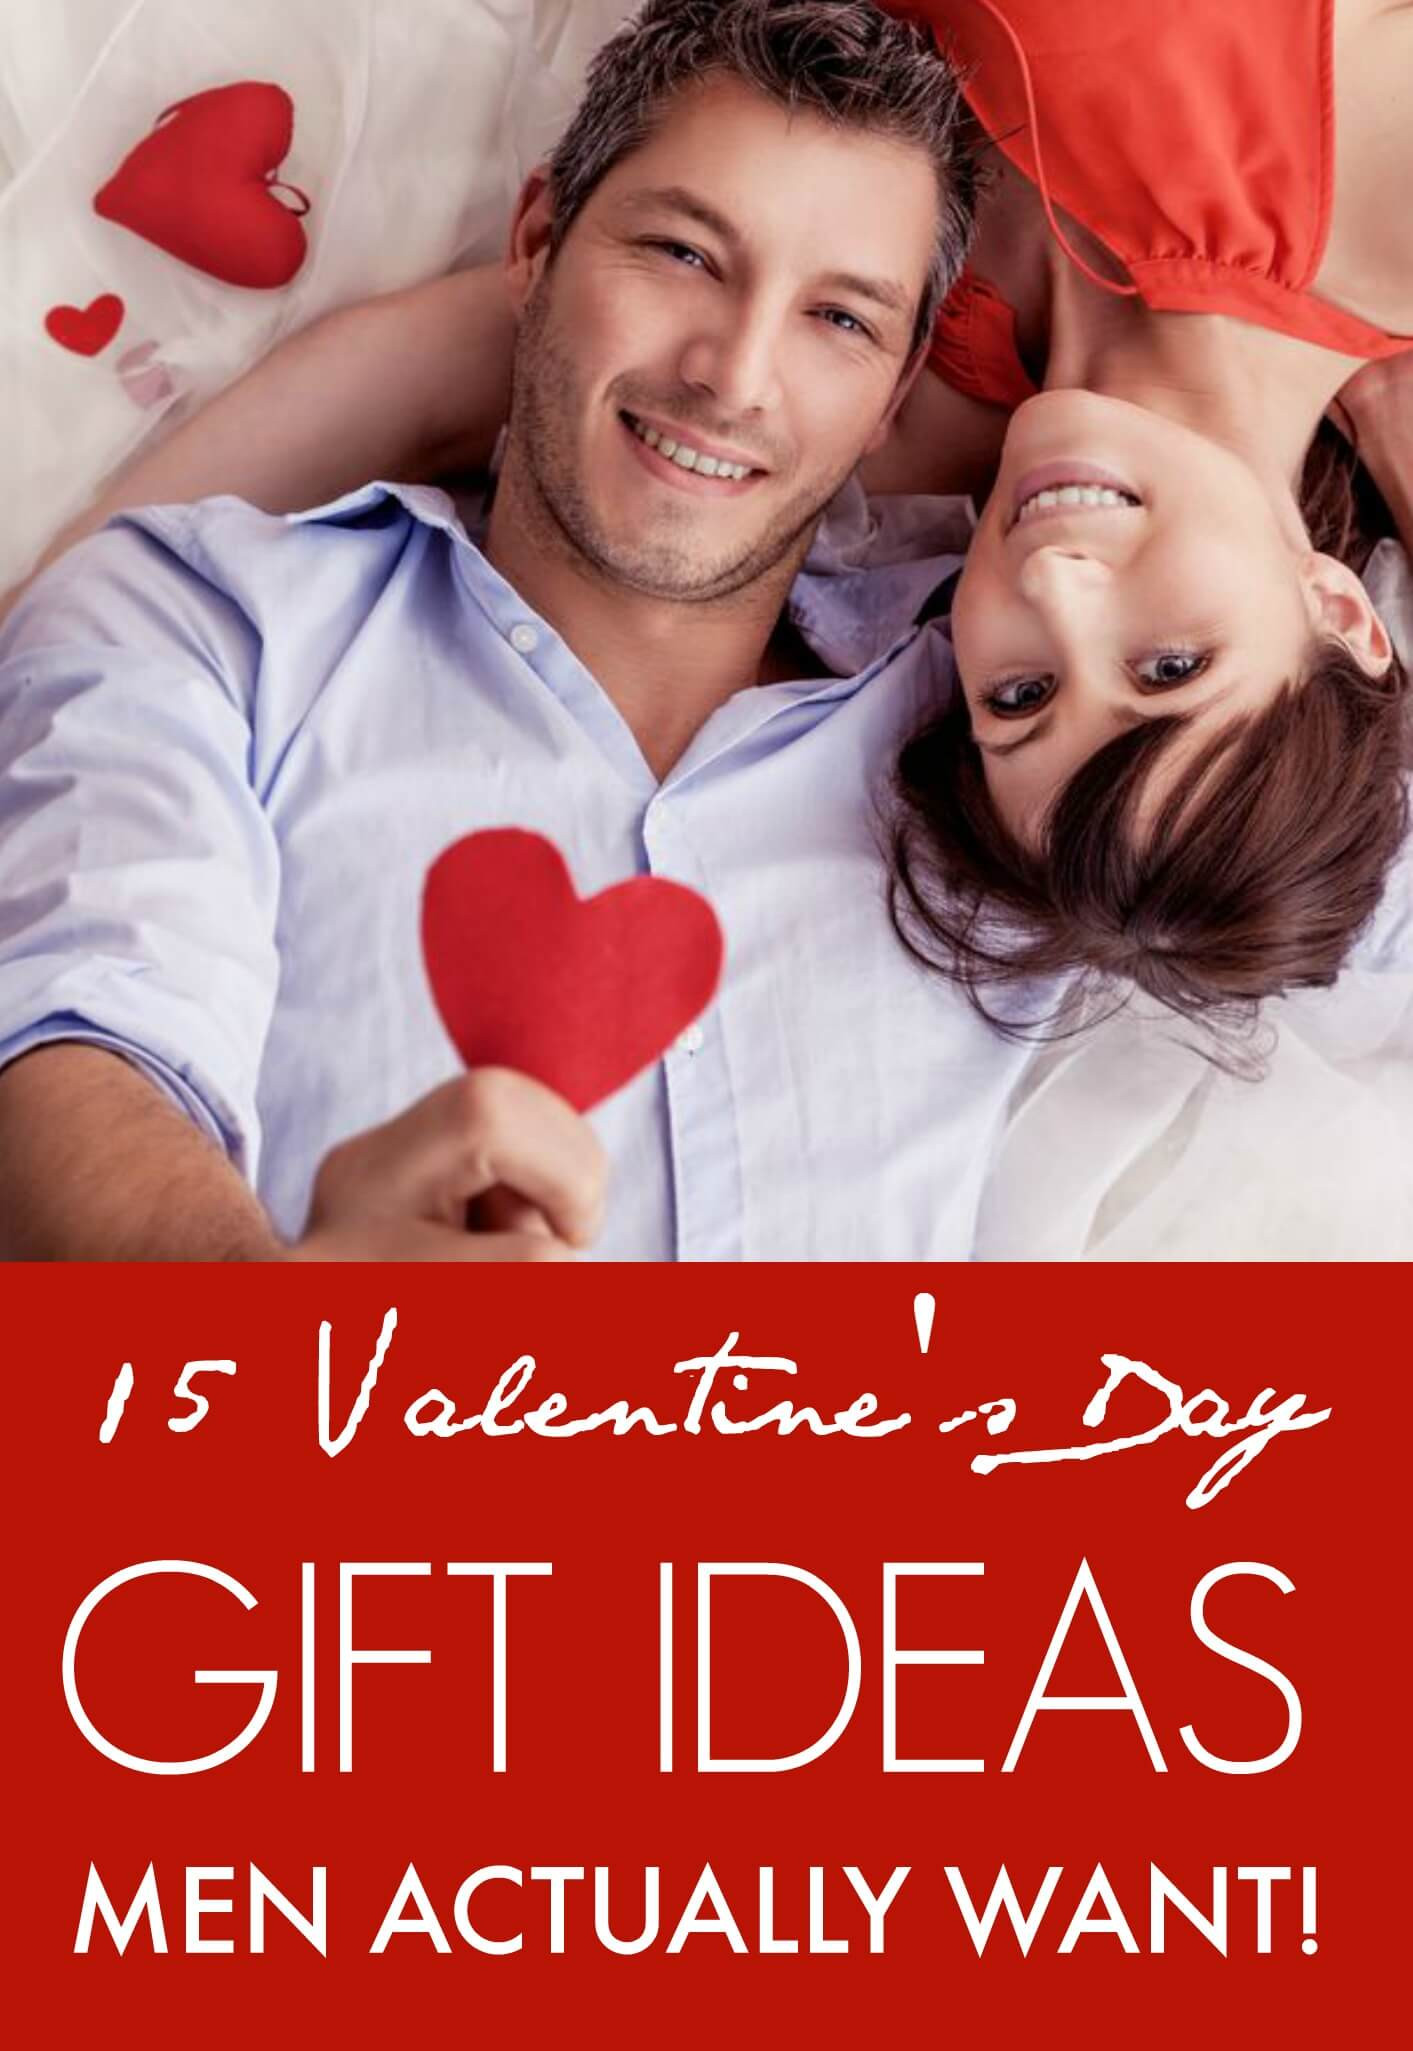 Gift Ideas For Guys For Valentines
 15 Valentine’s Day Gift ideas Men Actually Want